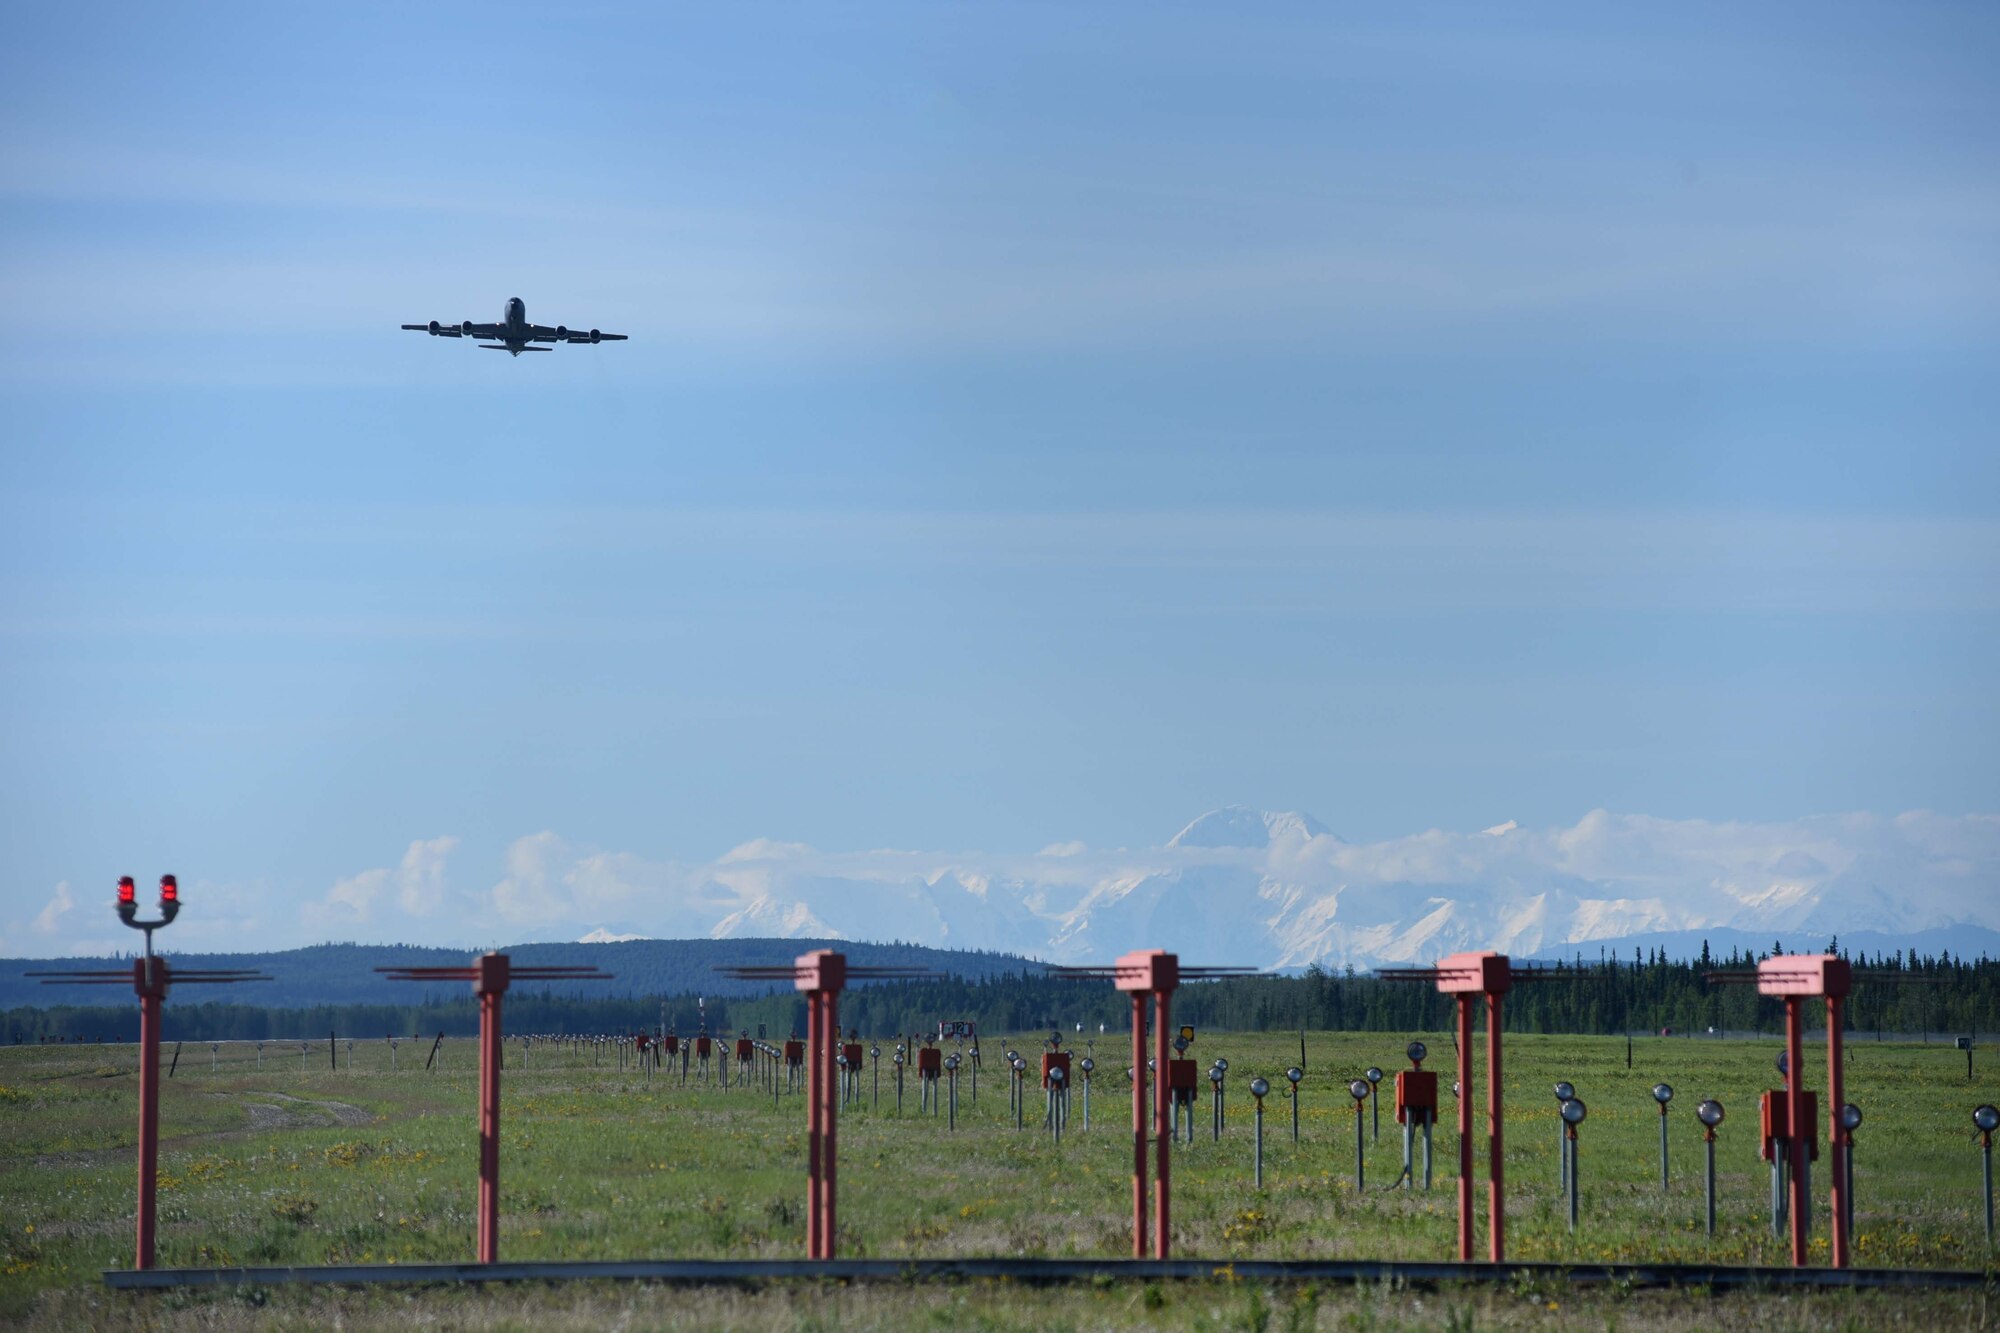 A KC-135 Stratotanker takes-off during Red Flag-Alaska 17-2, June 14, 2017, at Eielson Air Force Base, Alaska. Four McConnell aircrew took two KC-135s to provide warfighting support during the two-week exercise. (U.S. Air Force photo/Senior Airman Chris Thornbury)